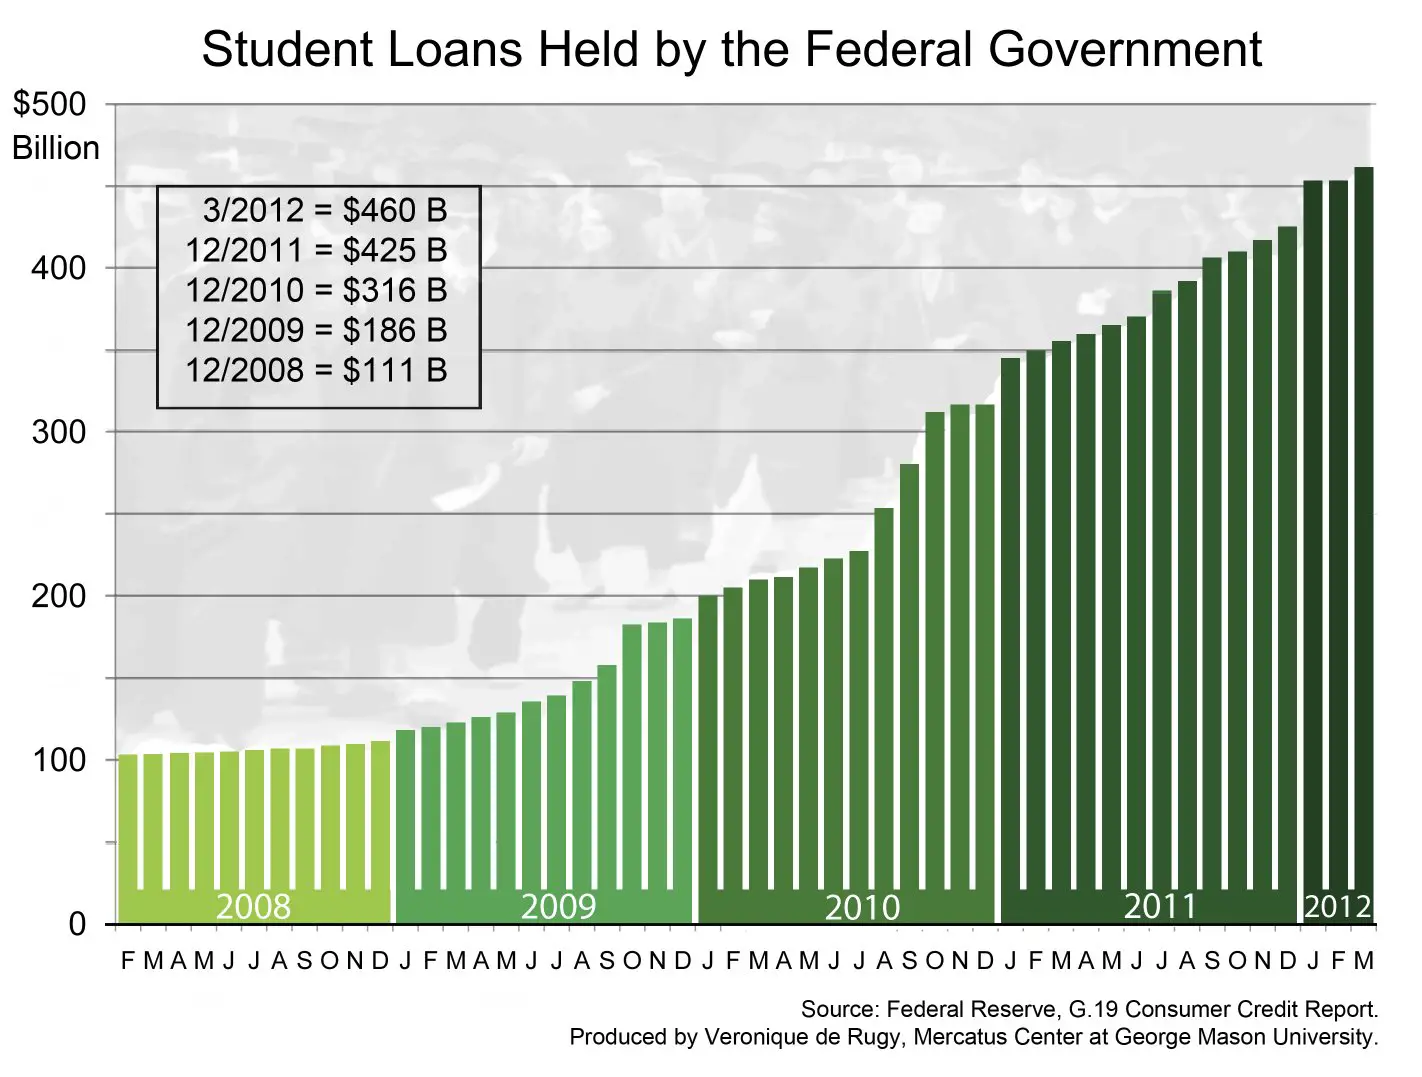 Student Loans Held by the Federal Government